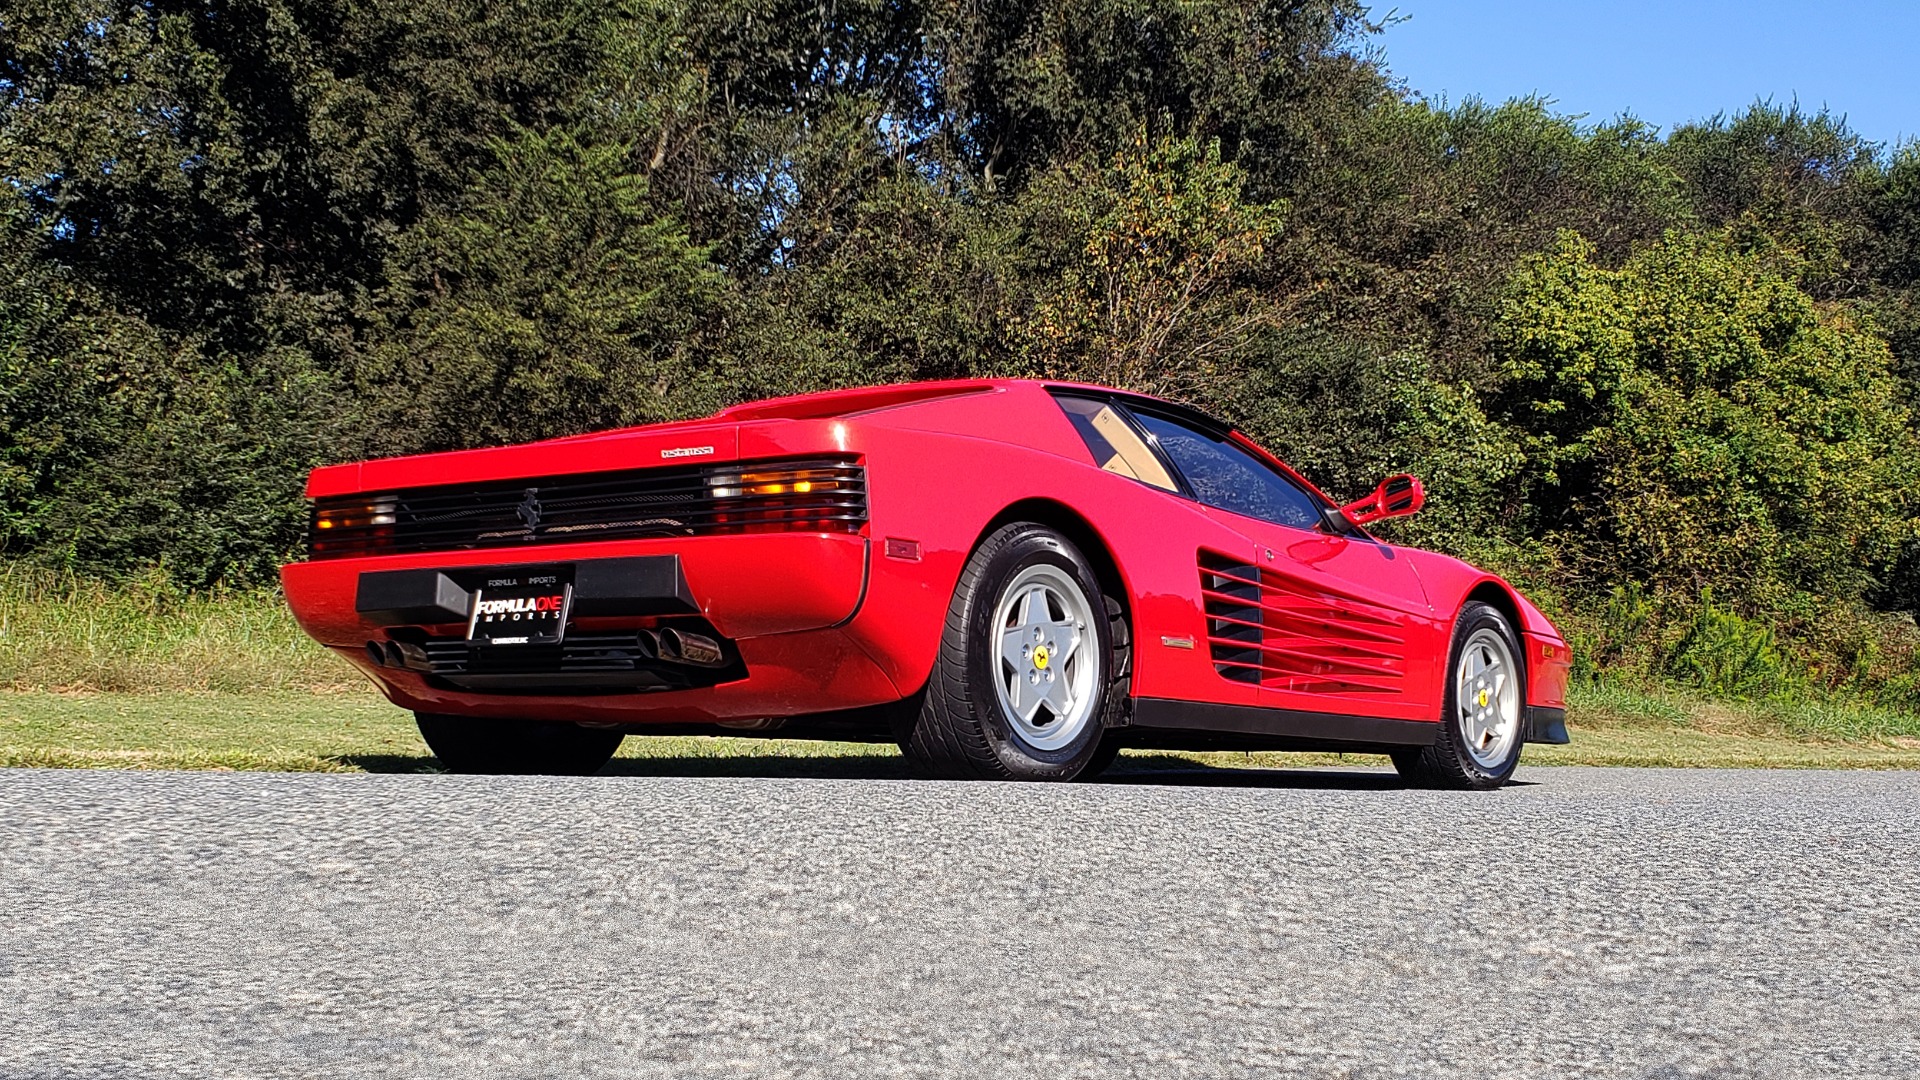 Used 1988 Ferrari TESTAROSSA COUPE / 4.9L FLAT-12 / 5-SPEED MANUAL / LOW MILES SUPER CLEAN for sale Sold at Formula Imports in Charlotte NC 28227 9